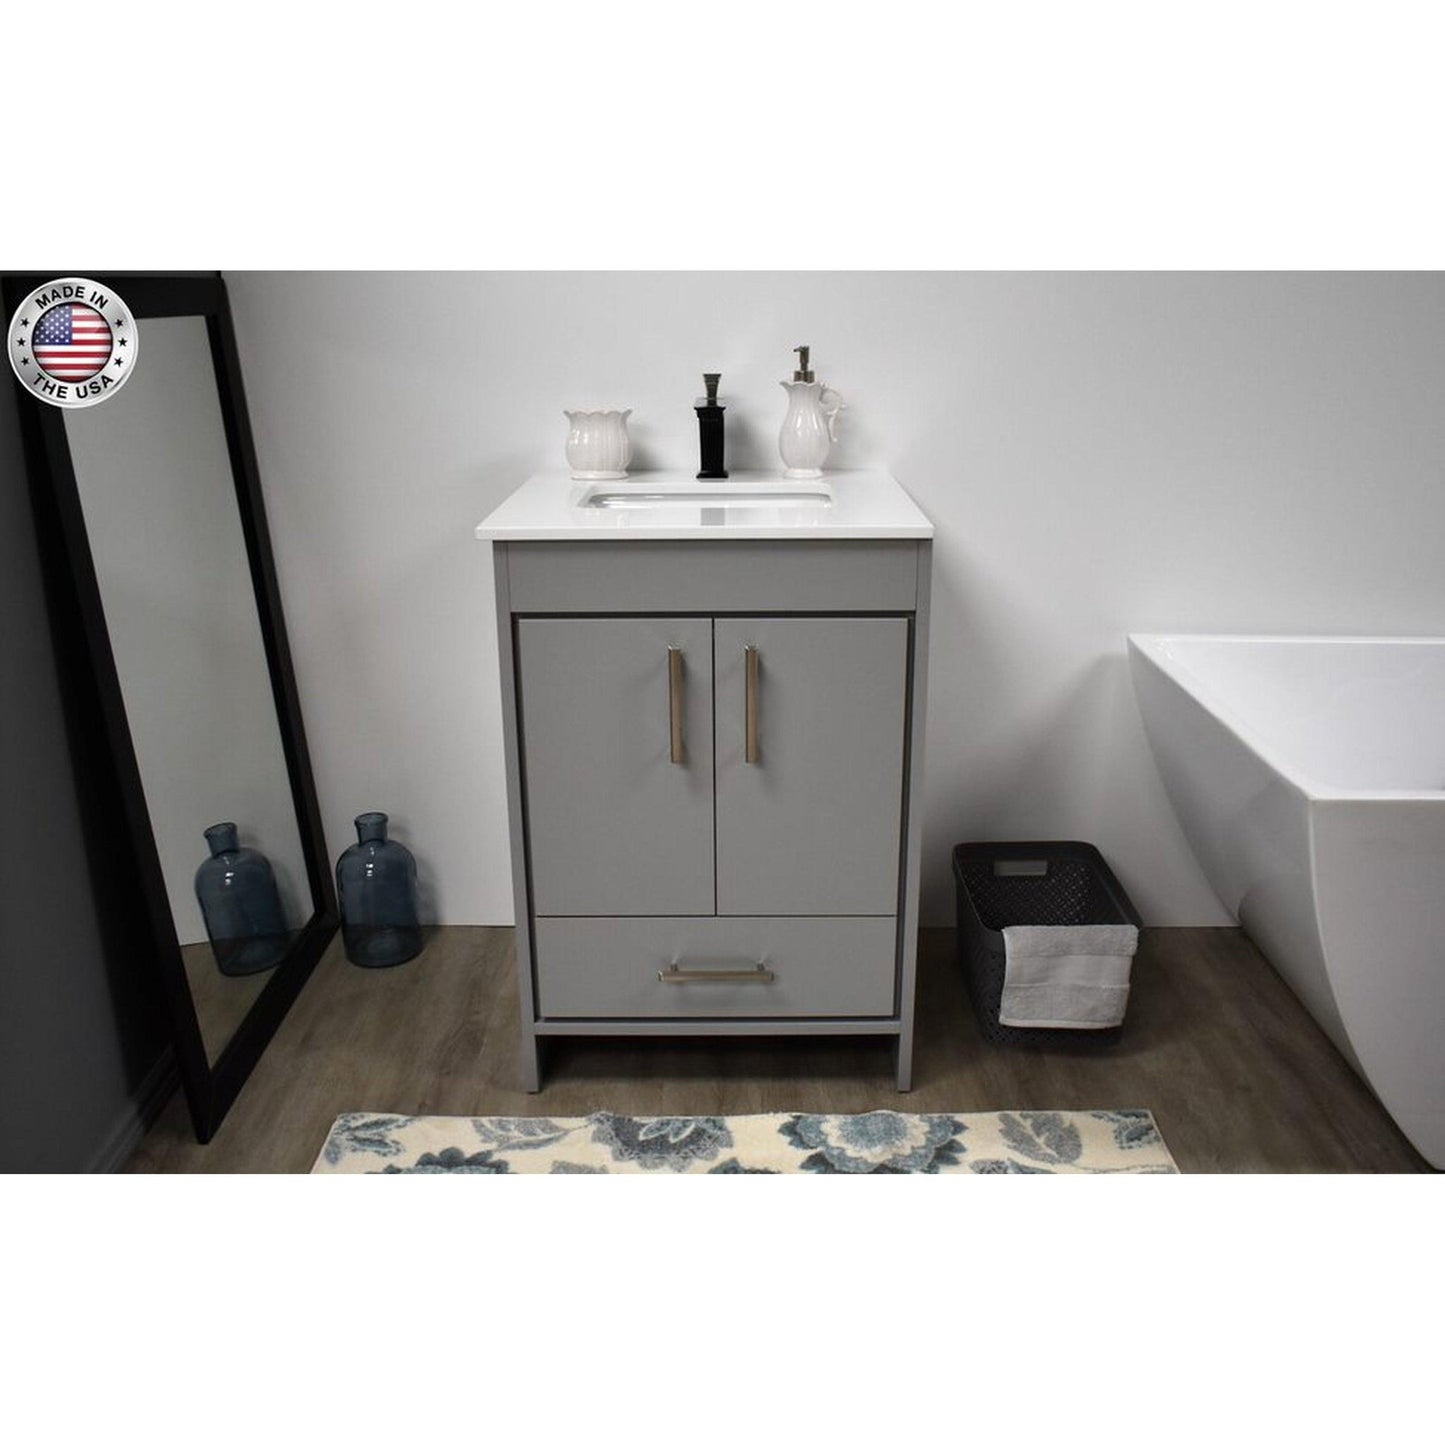 Volpa USA Capri 24" x 22" Gray Freestanding Modern Bathroom Vanity With Preinstalled Undermount Sink And White Microstone Top With Brushed Nickel Edge Handles